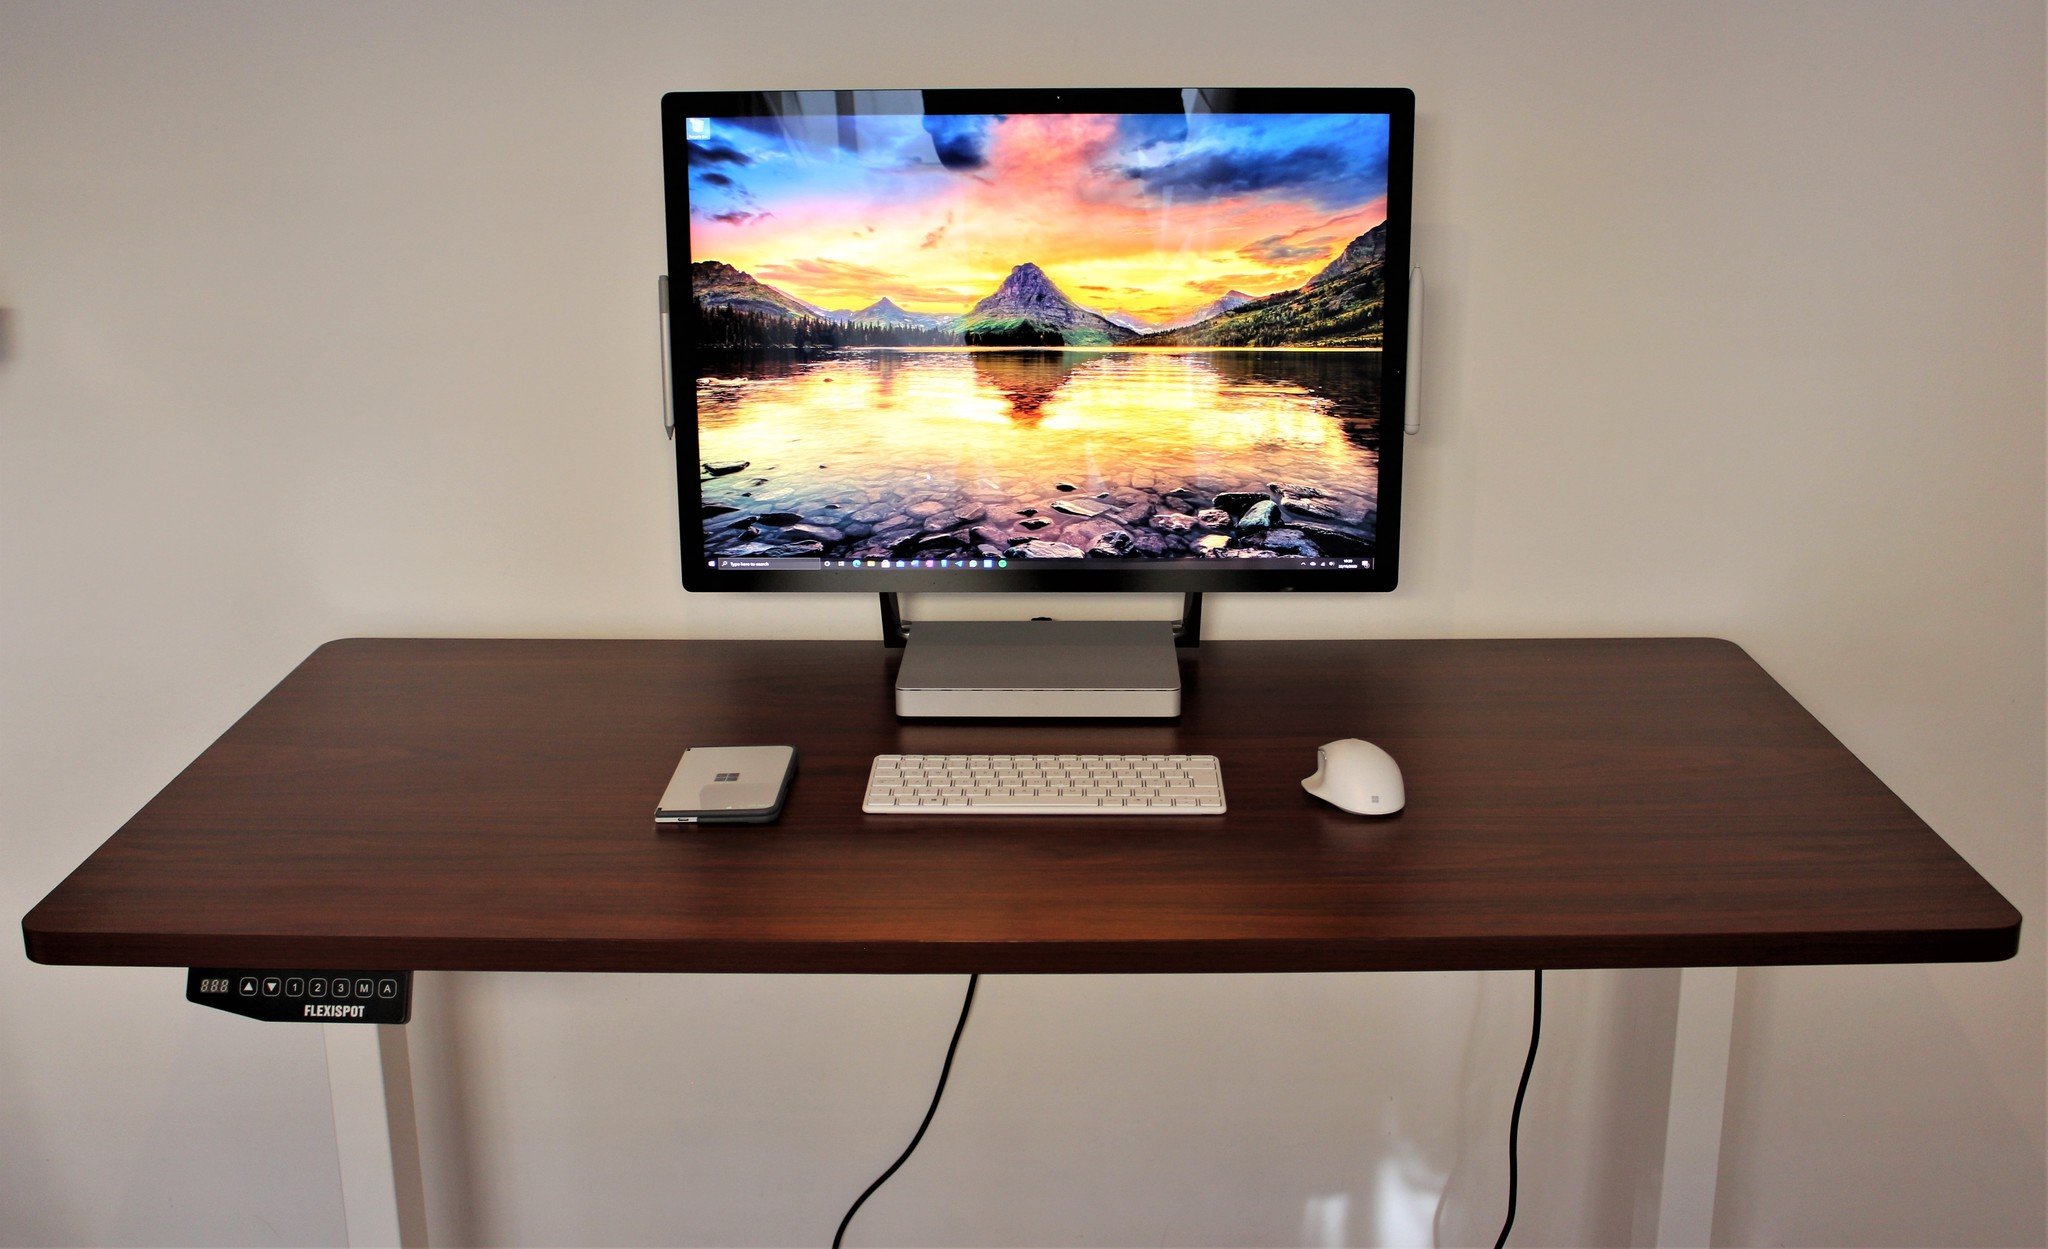 FlexiSpot E5 standing desk review: A great choice for working at home